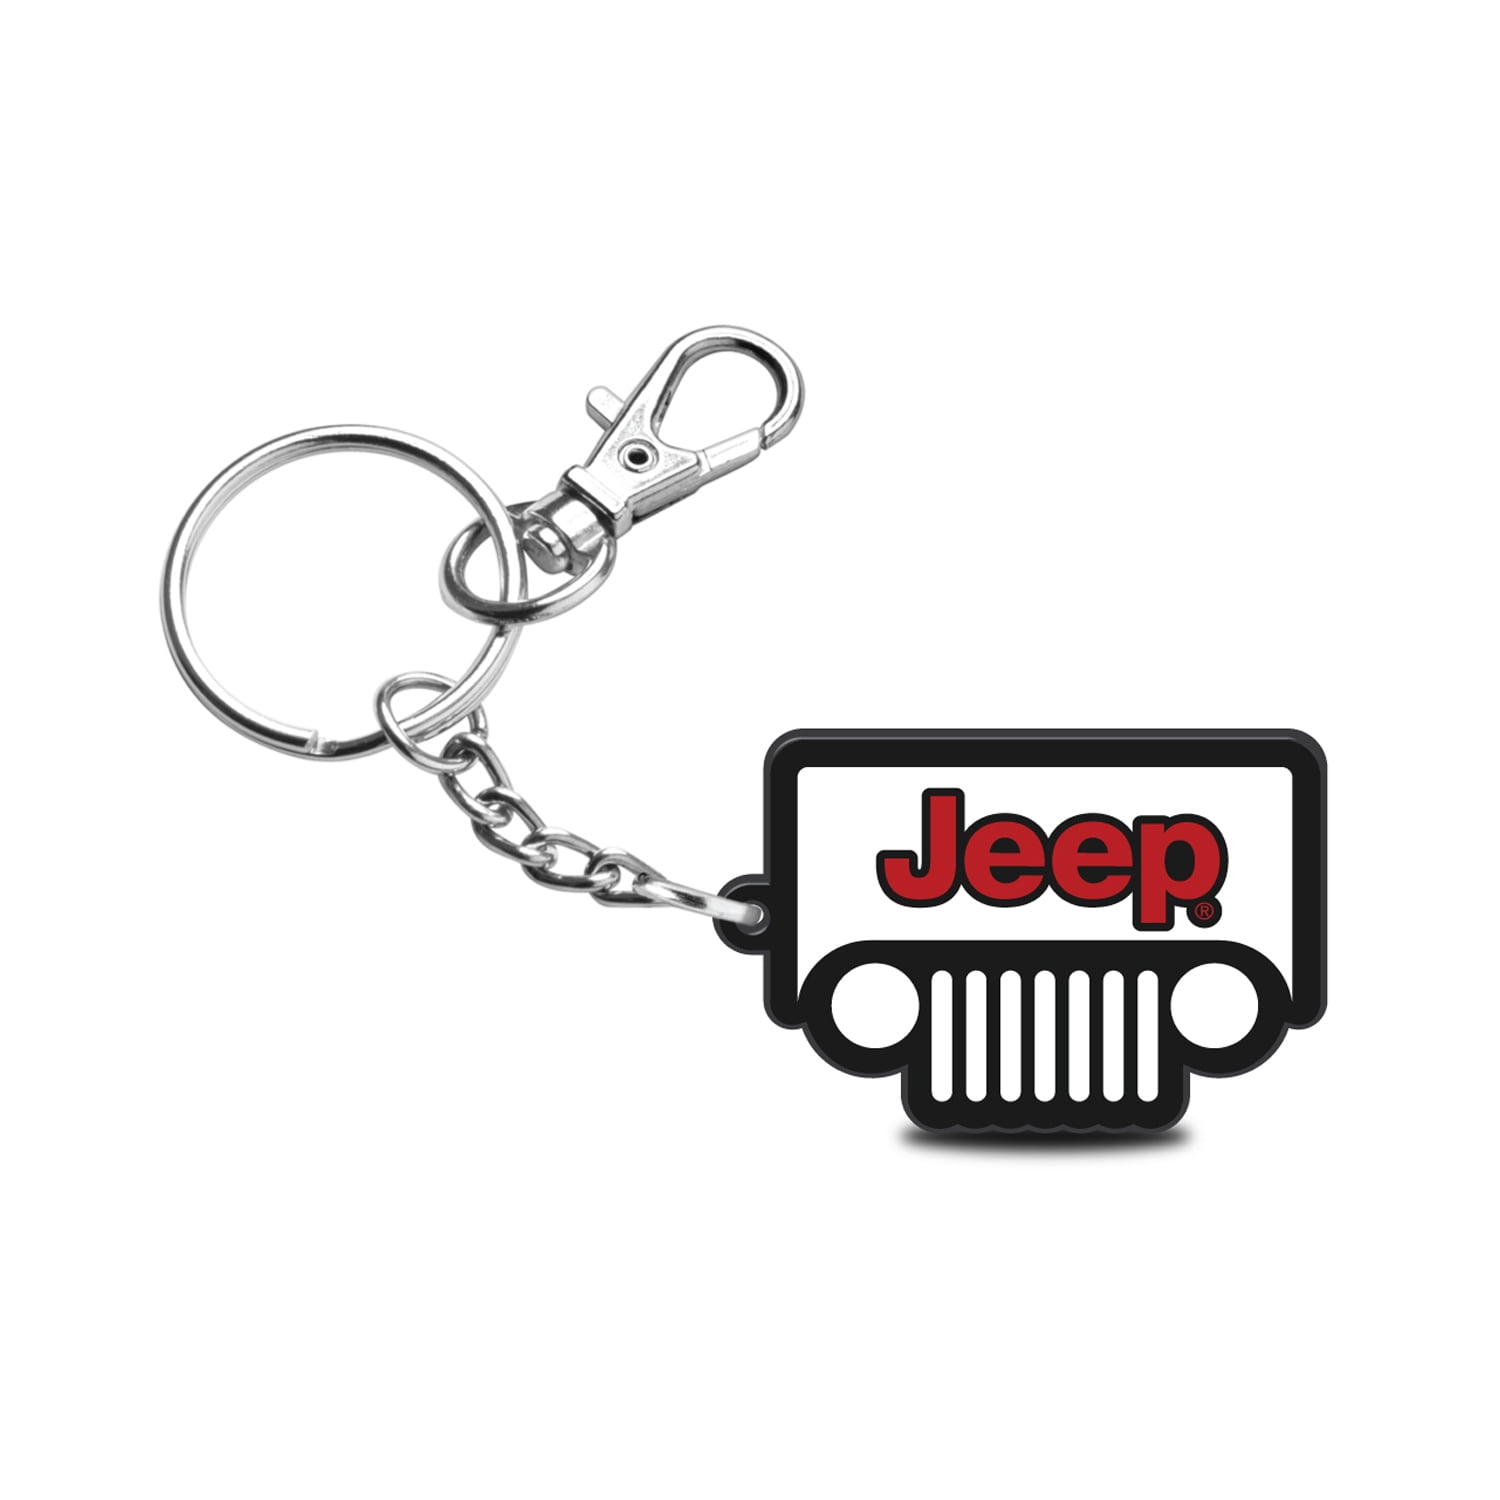 Jeep in Red Rectangular Black Leatherette Key Chain iPick Image for